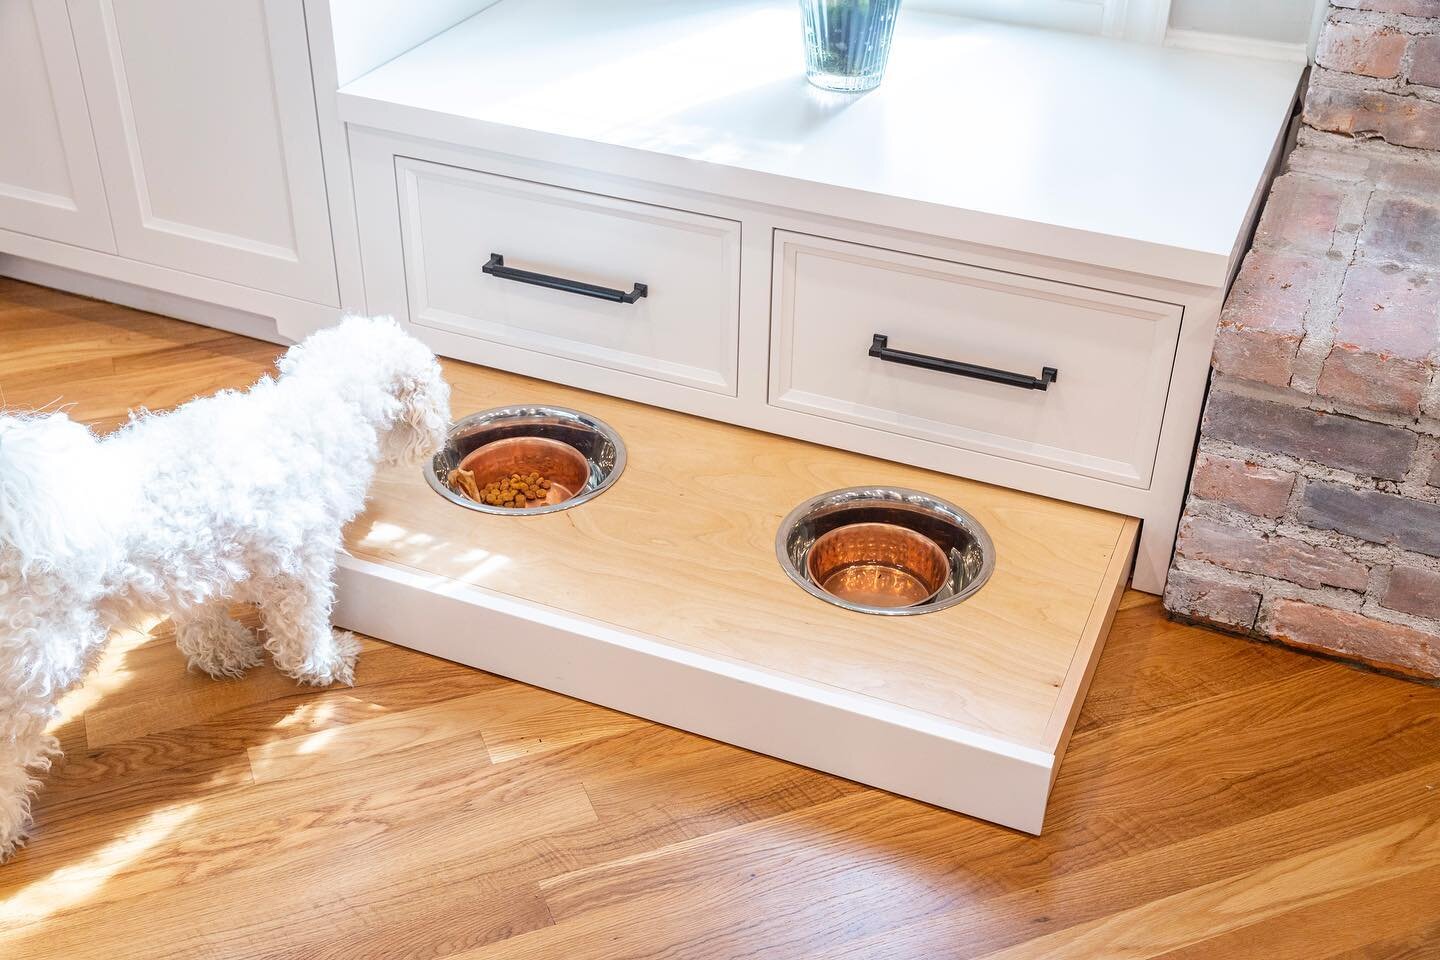 Who says doggies don&rsquo;t love custom cabinetry too?! This project was so fun. We created a functional spot for Cloud&rsquo;s bowls that are the perfect height for him and tuck away neatly when not in use. Just in time for the dog days of summer! 